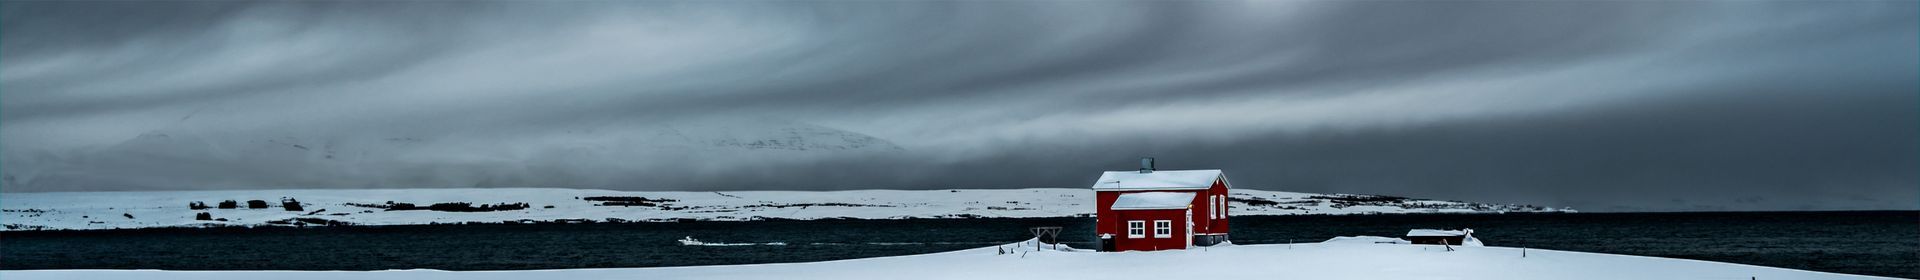 a red house in the middle of a snowy field on a cloudy day .